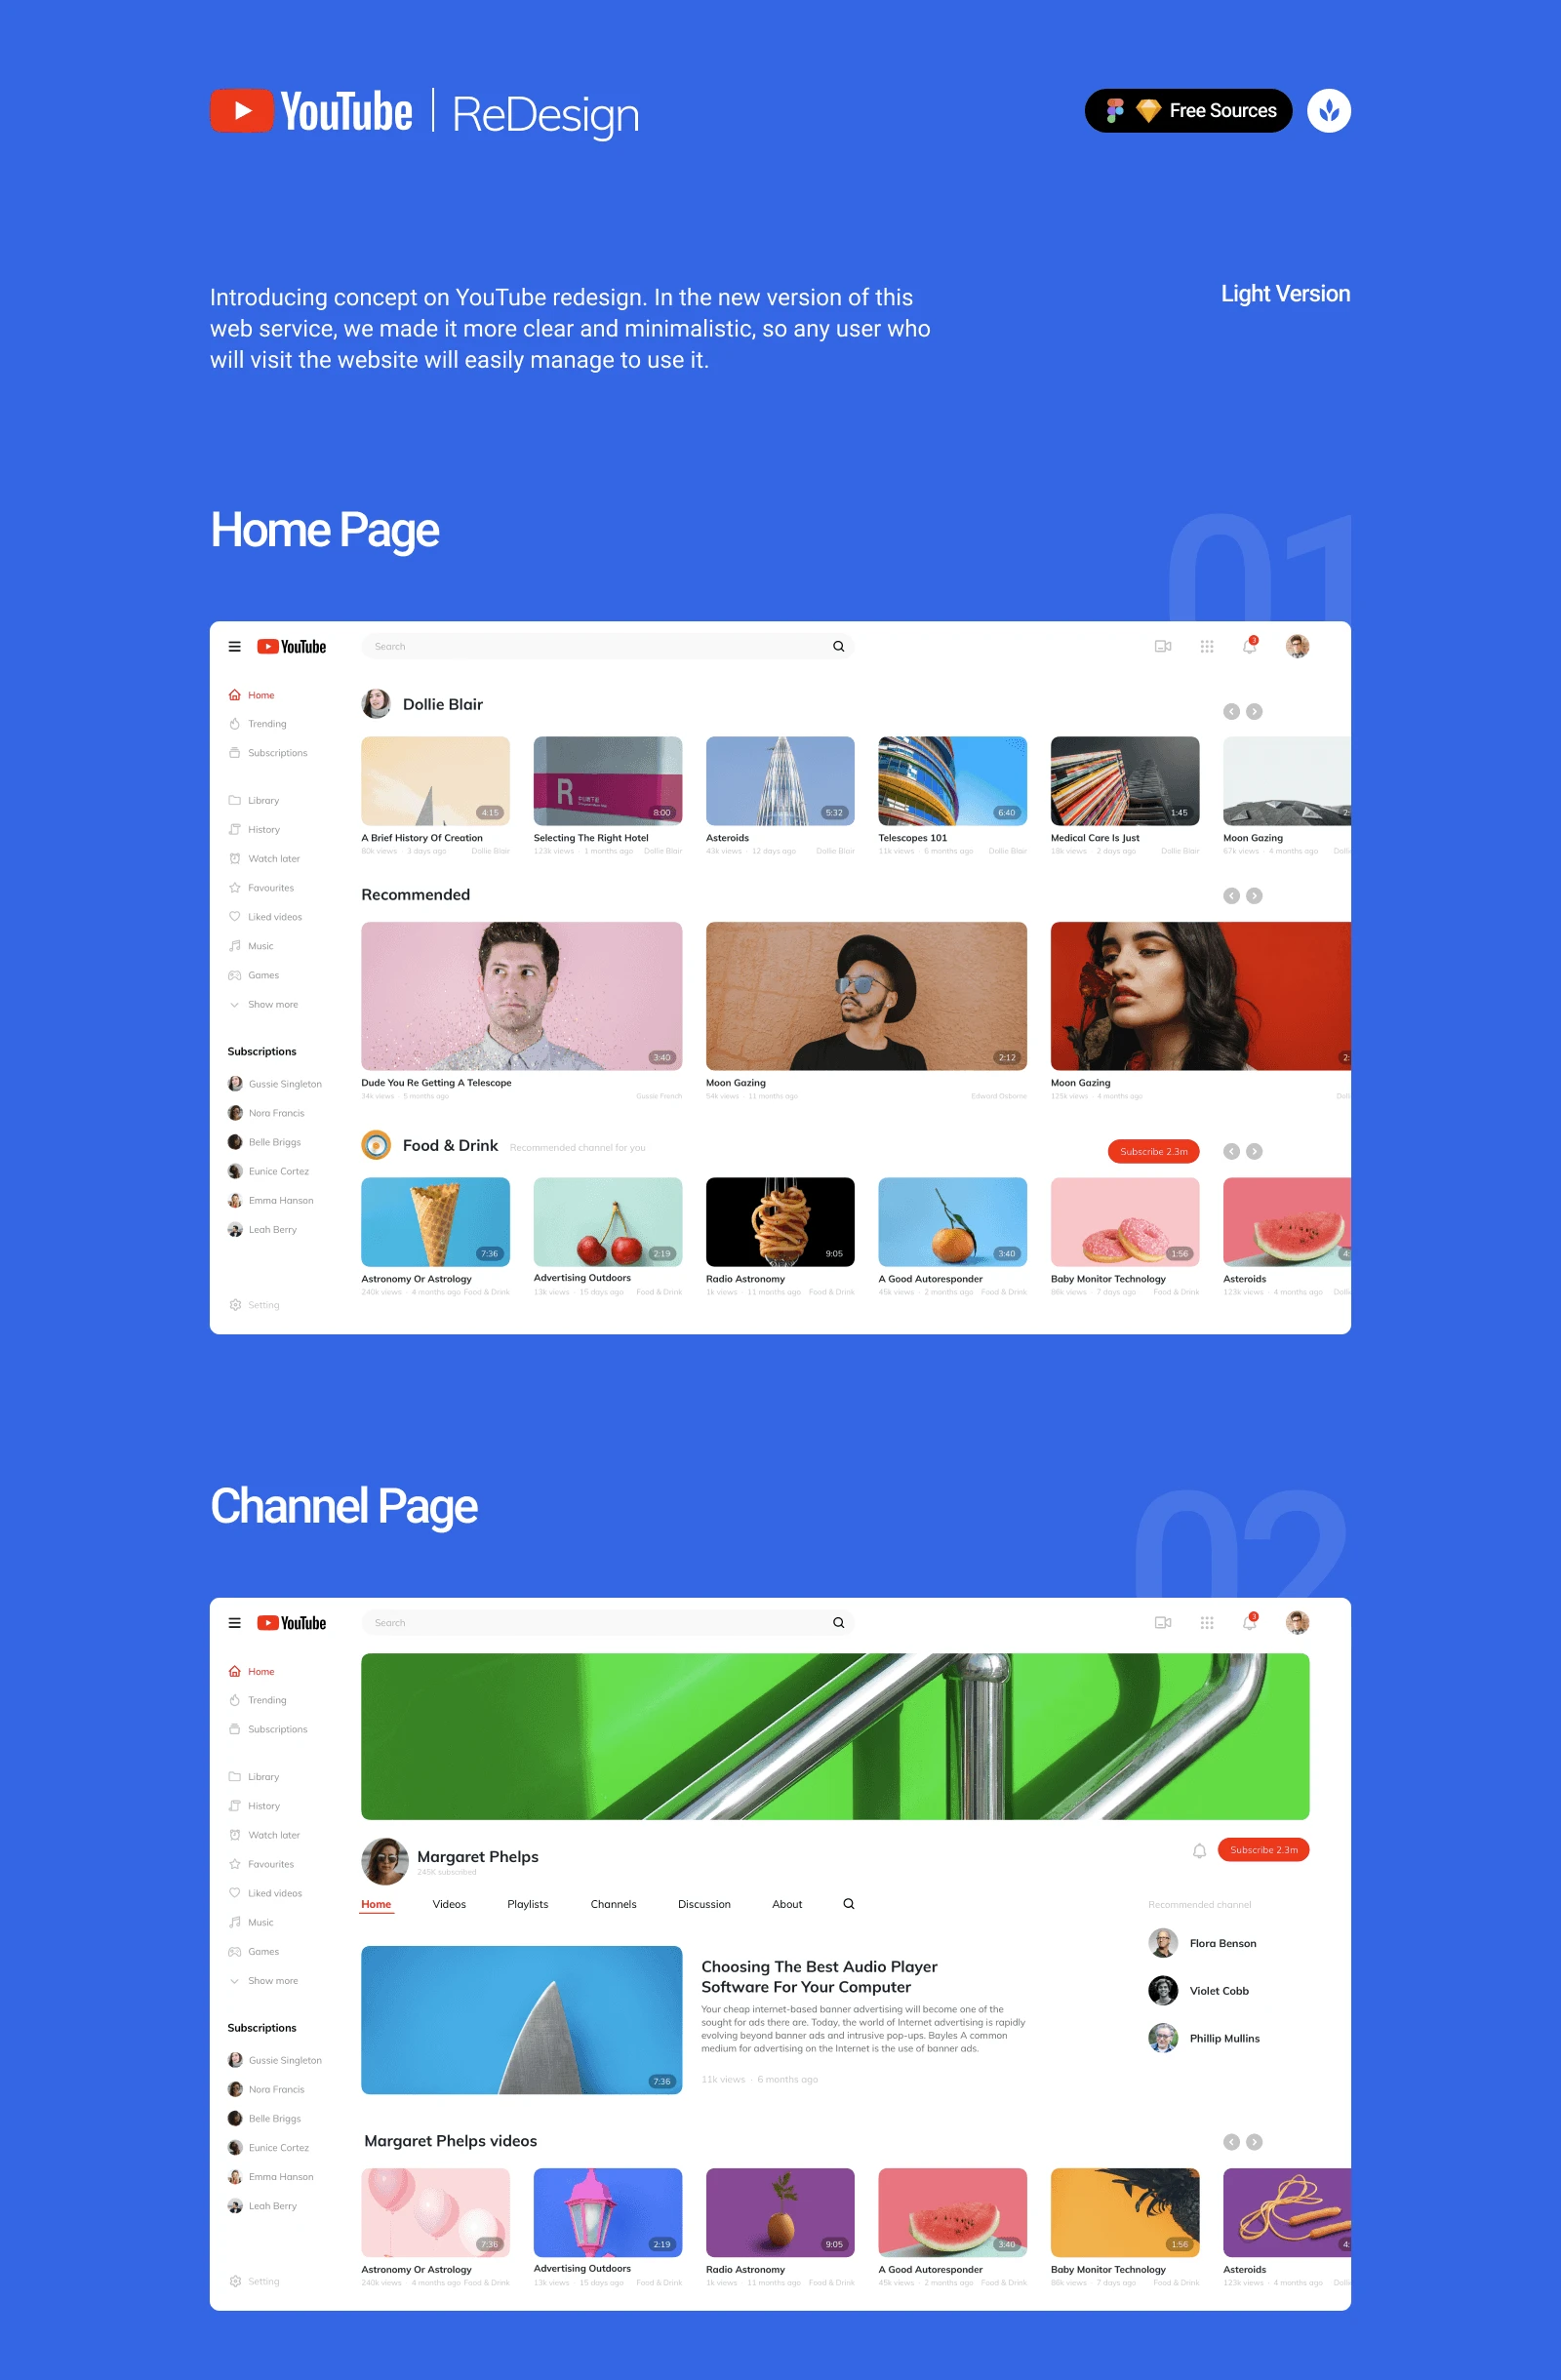 YouTube Redesign Concept - Introducing concept on YouTube redesign. In the new version of this web service, we made it more clear and minimalistic, so any user who will visit the website will easily manage to use it.